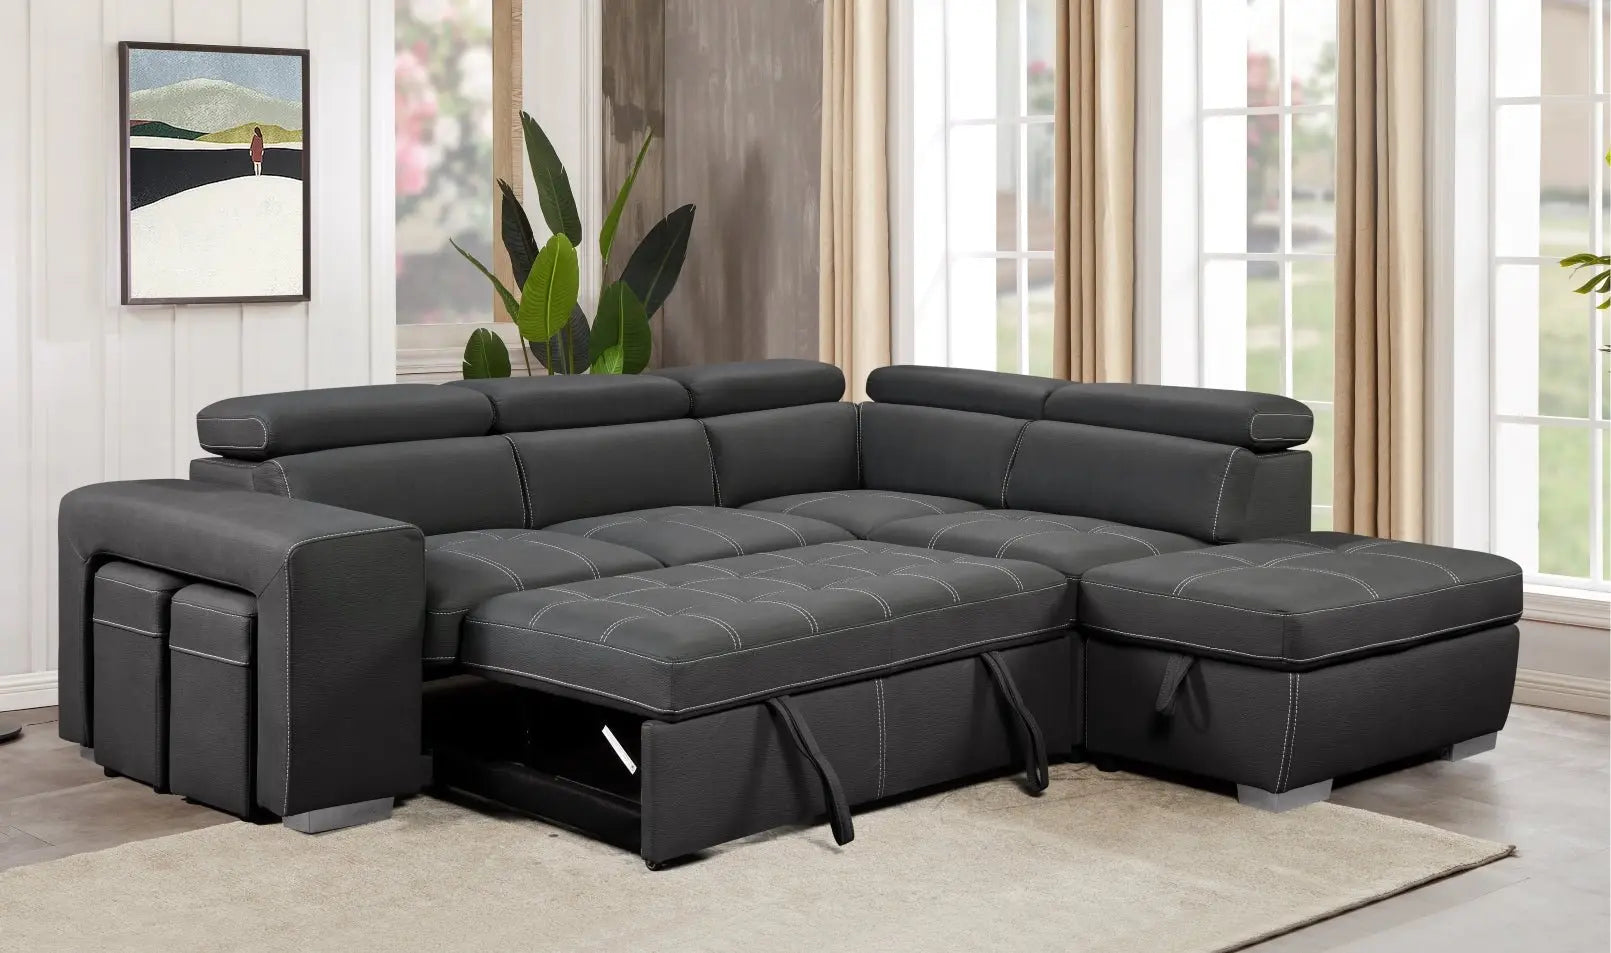 Leather Sleeper Sectional Sofa Bed